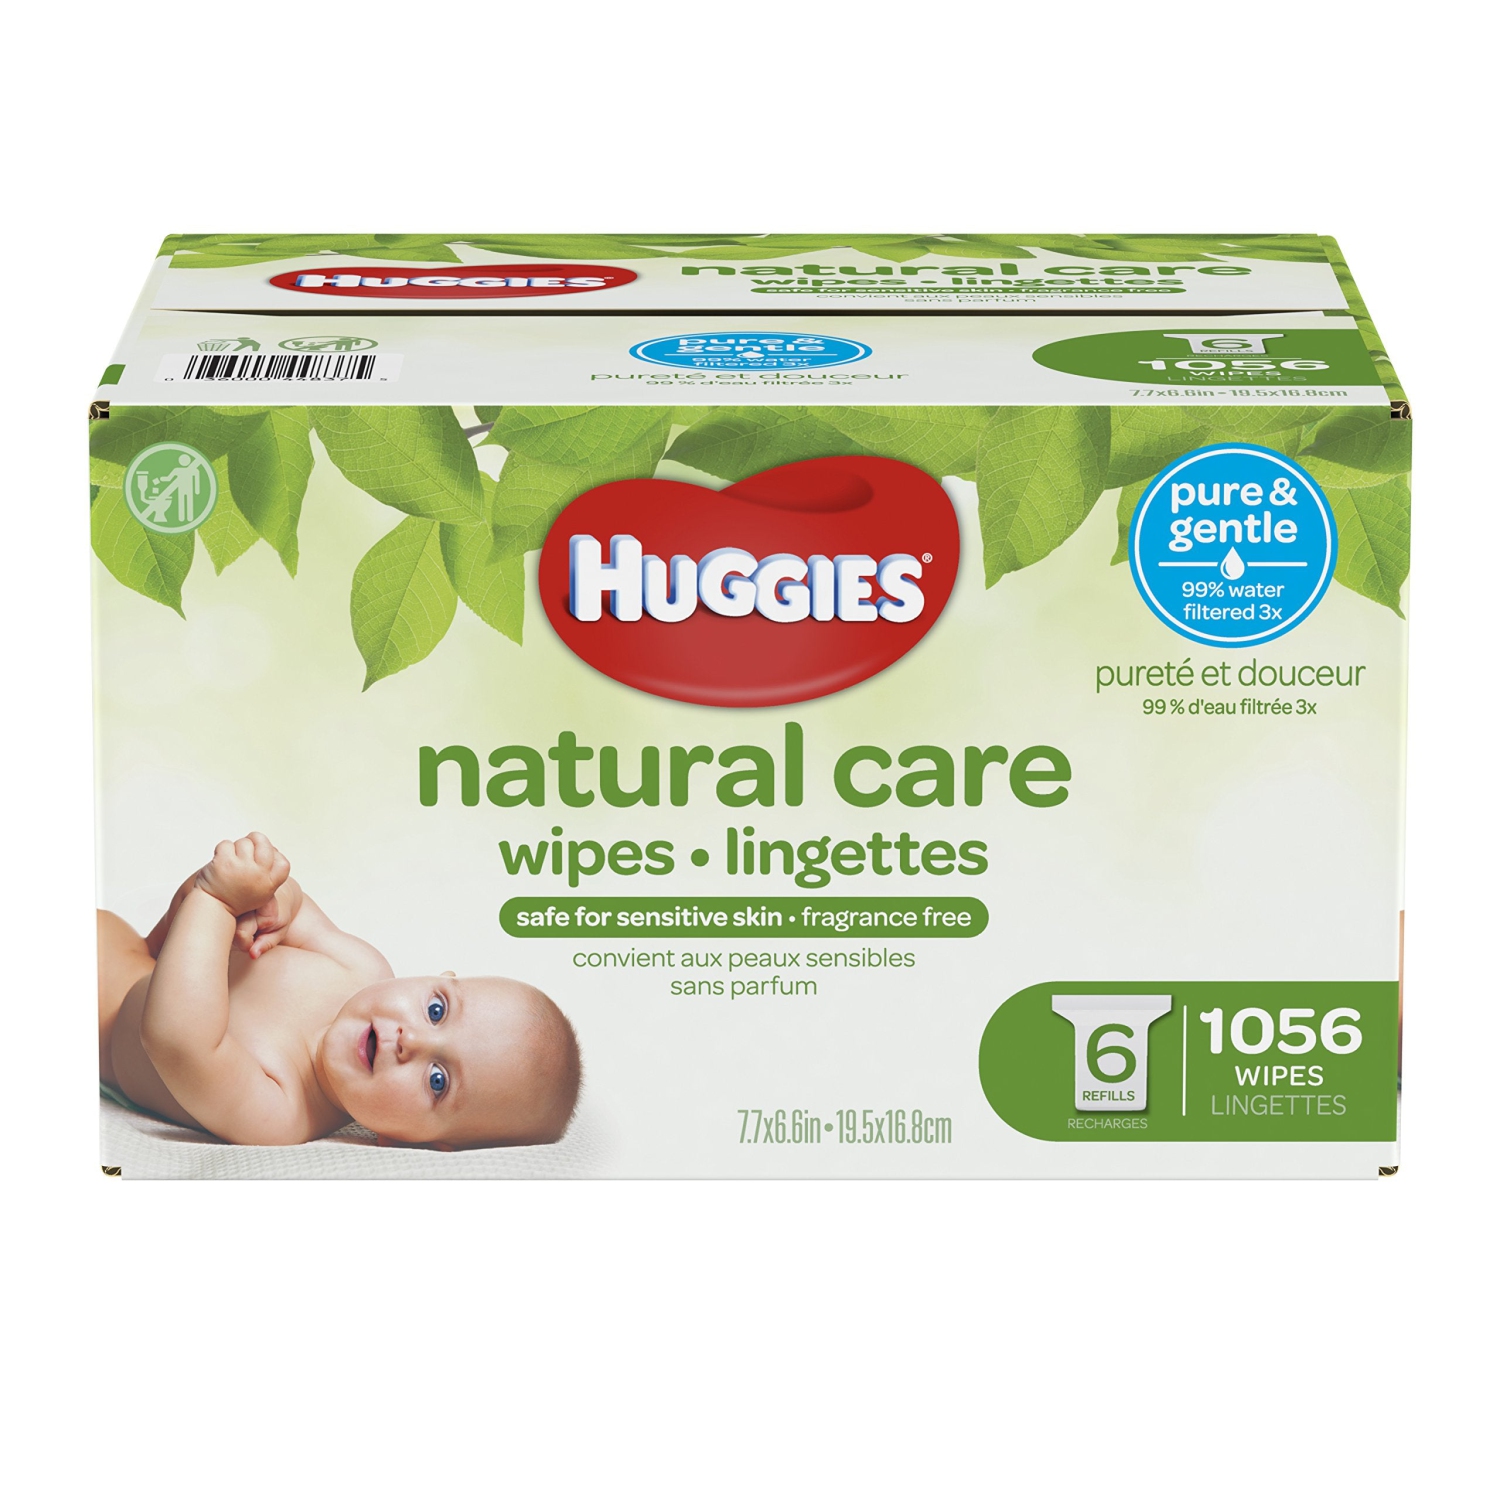 Huggies Natural Care Unscented Baby Wipes, Sensitive, 6 Refill Packs and Clutch 'N' Clean (Old Version)